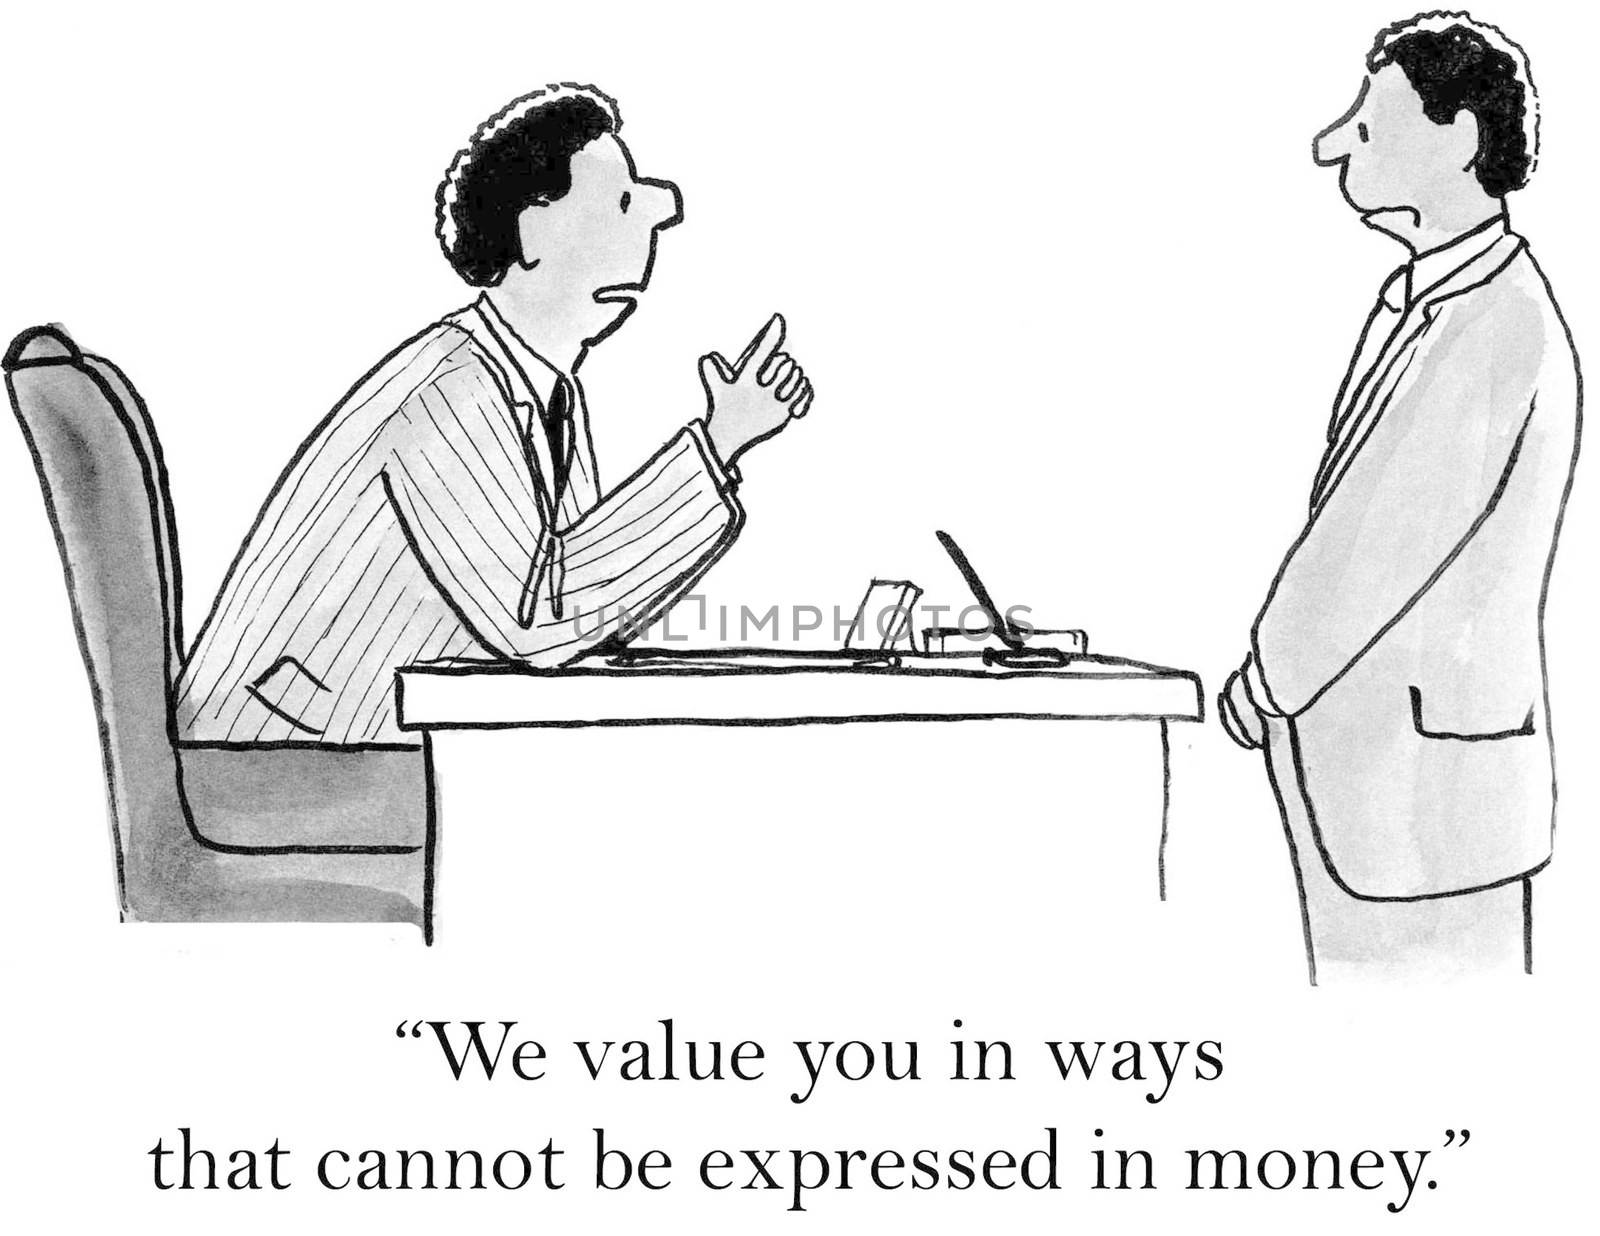 "We value you in ways that cannot be expressed in money."